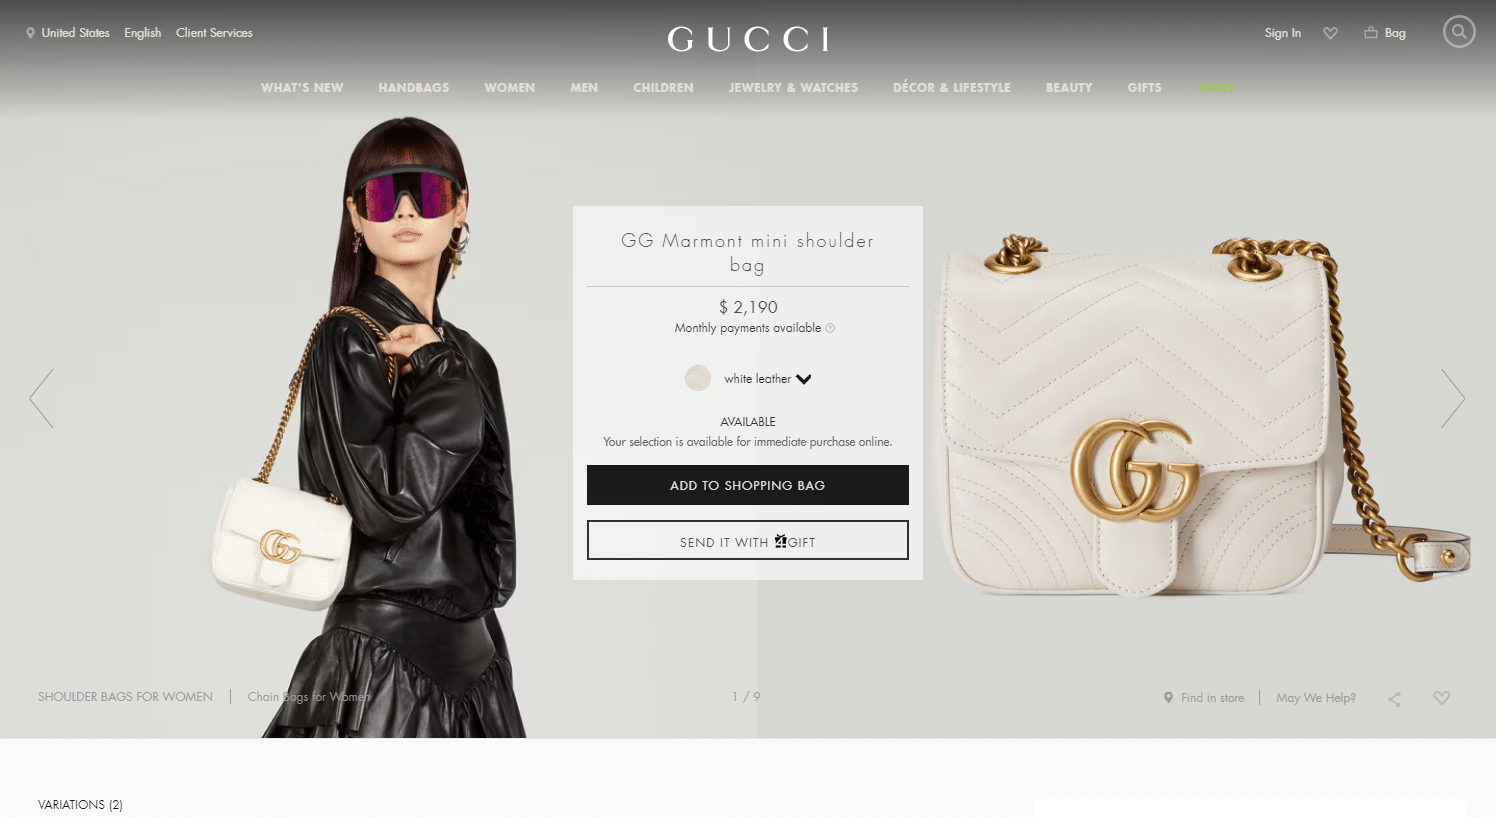 GG-Marmont-mini-shoulder-bag-in-black-leather-GUCCI-USfb4d6ba7c4f60954.png